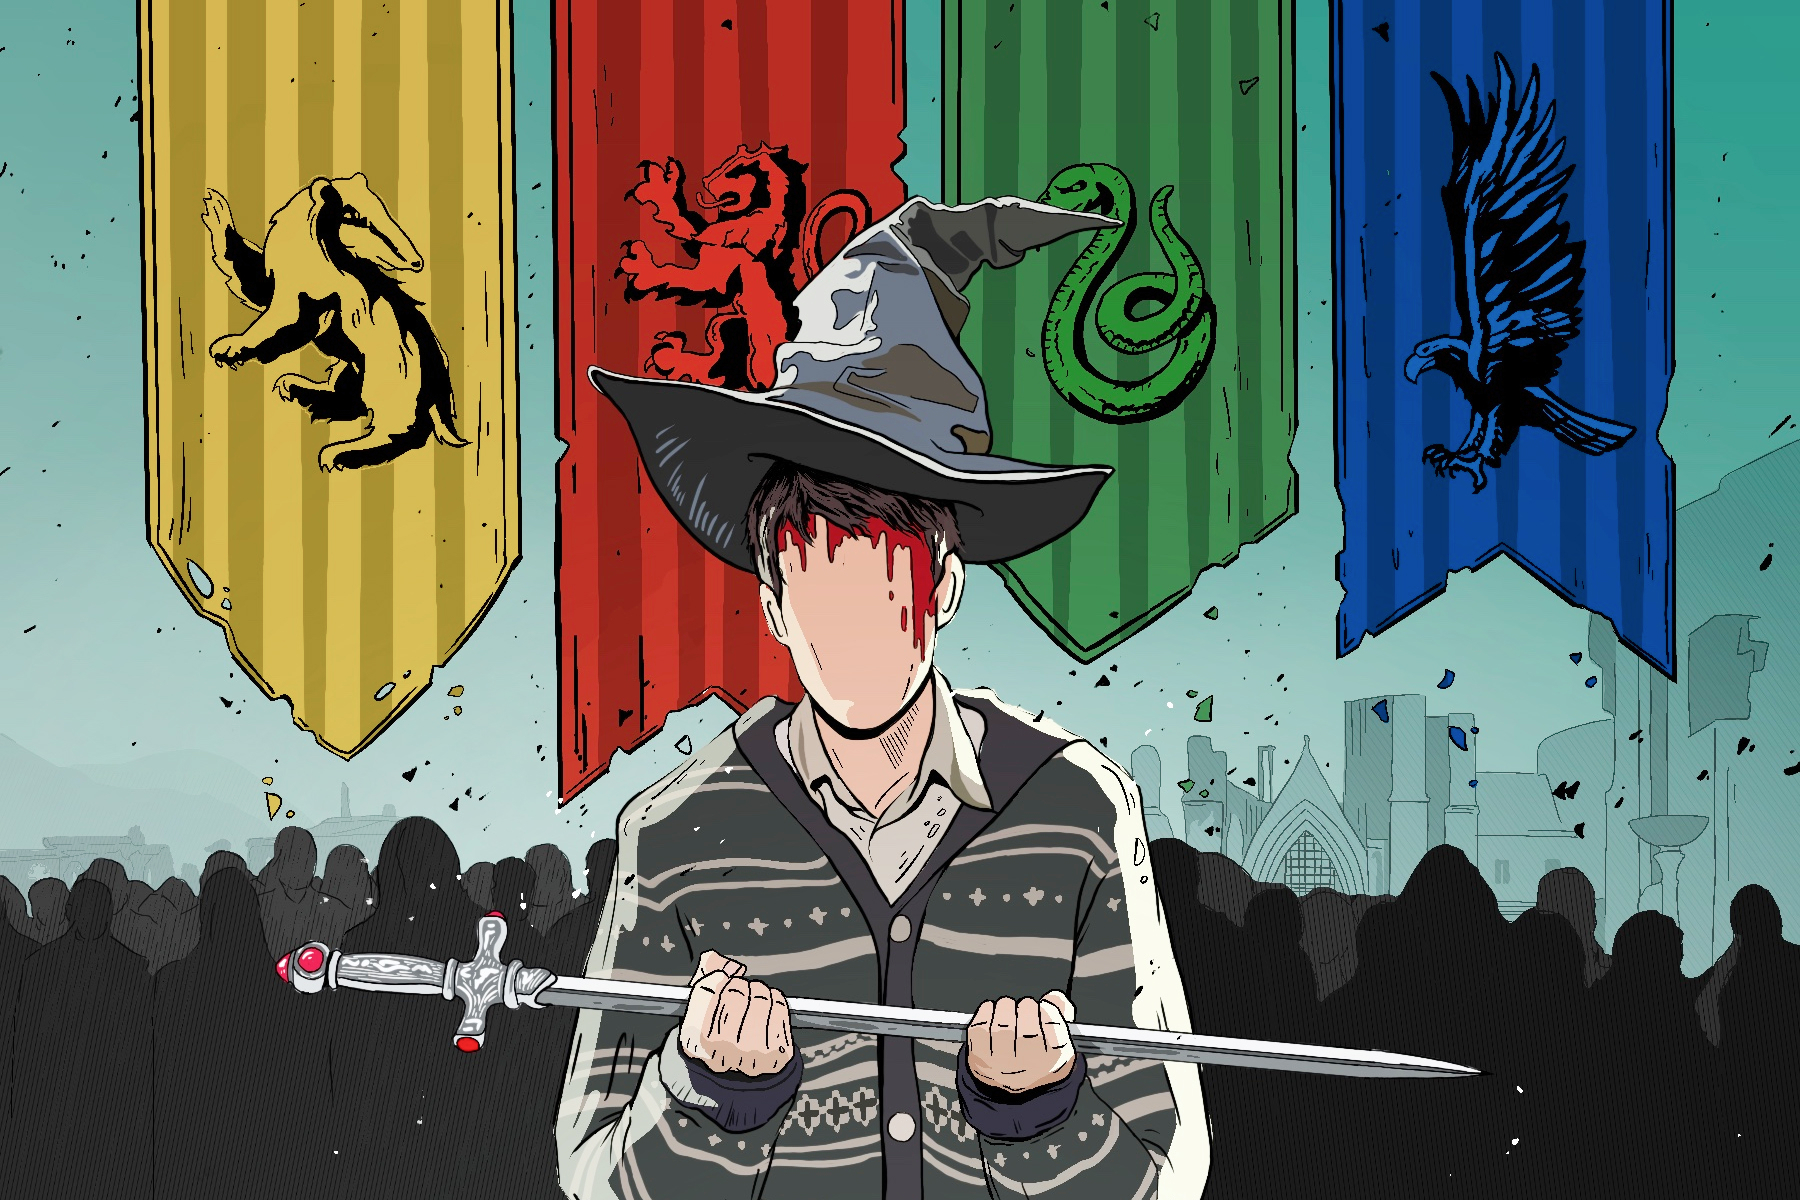 Illustration of someone wearing the Sorting Hat in front of 4 flags representing each house